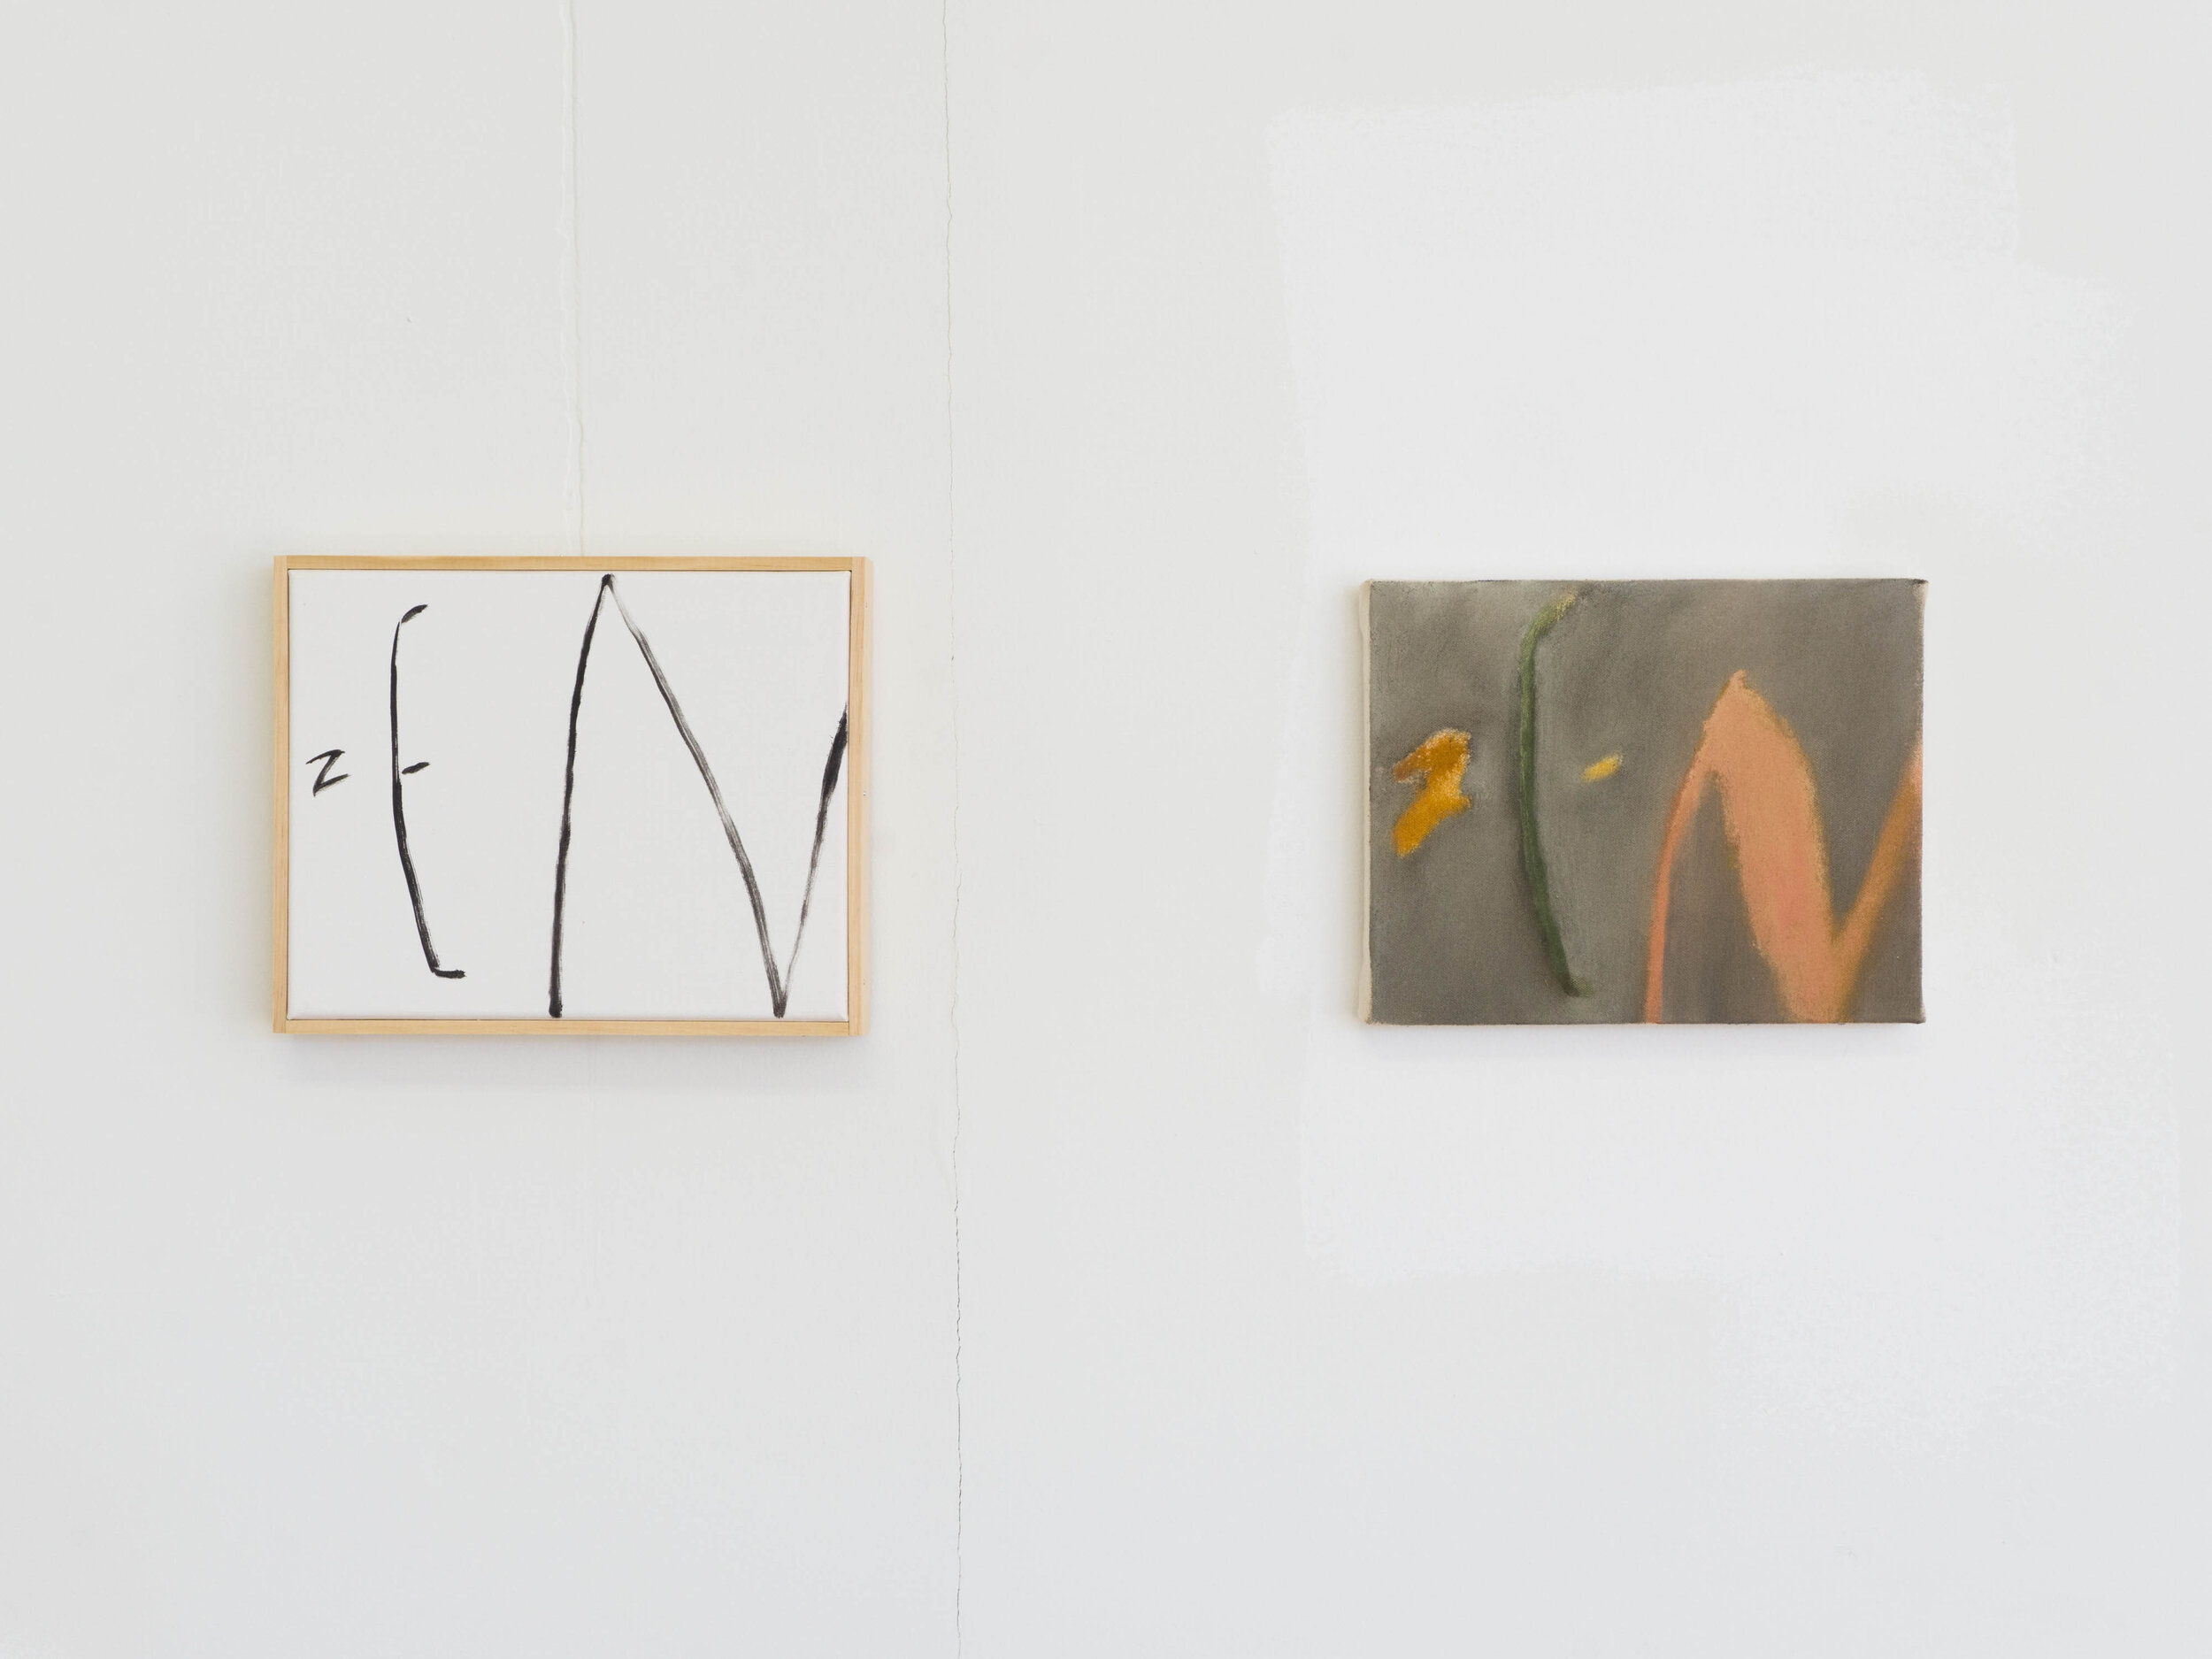  Ted Gahl,  Zen Paintings , installation view 